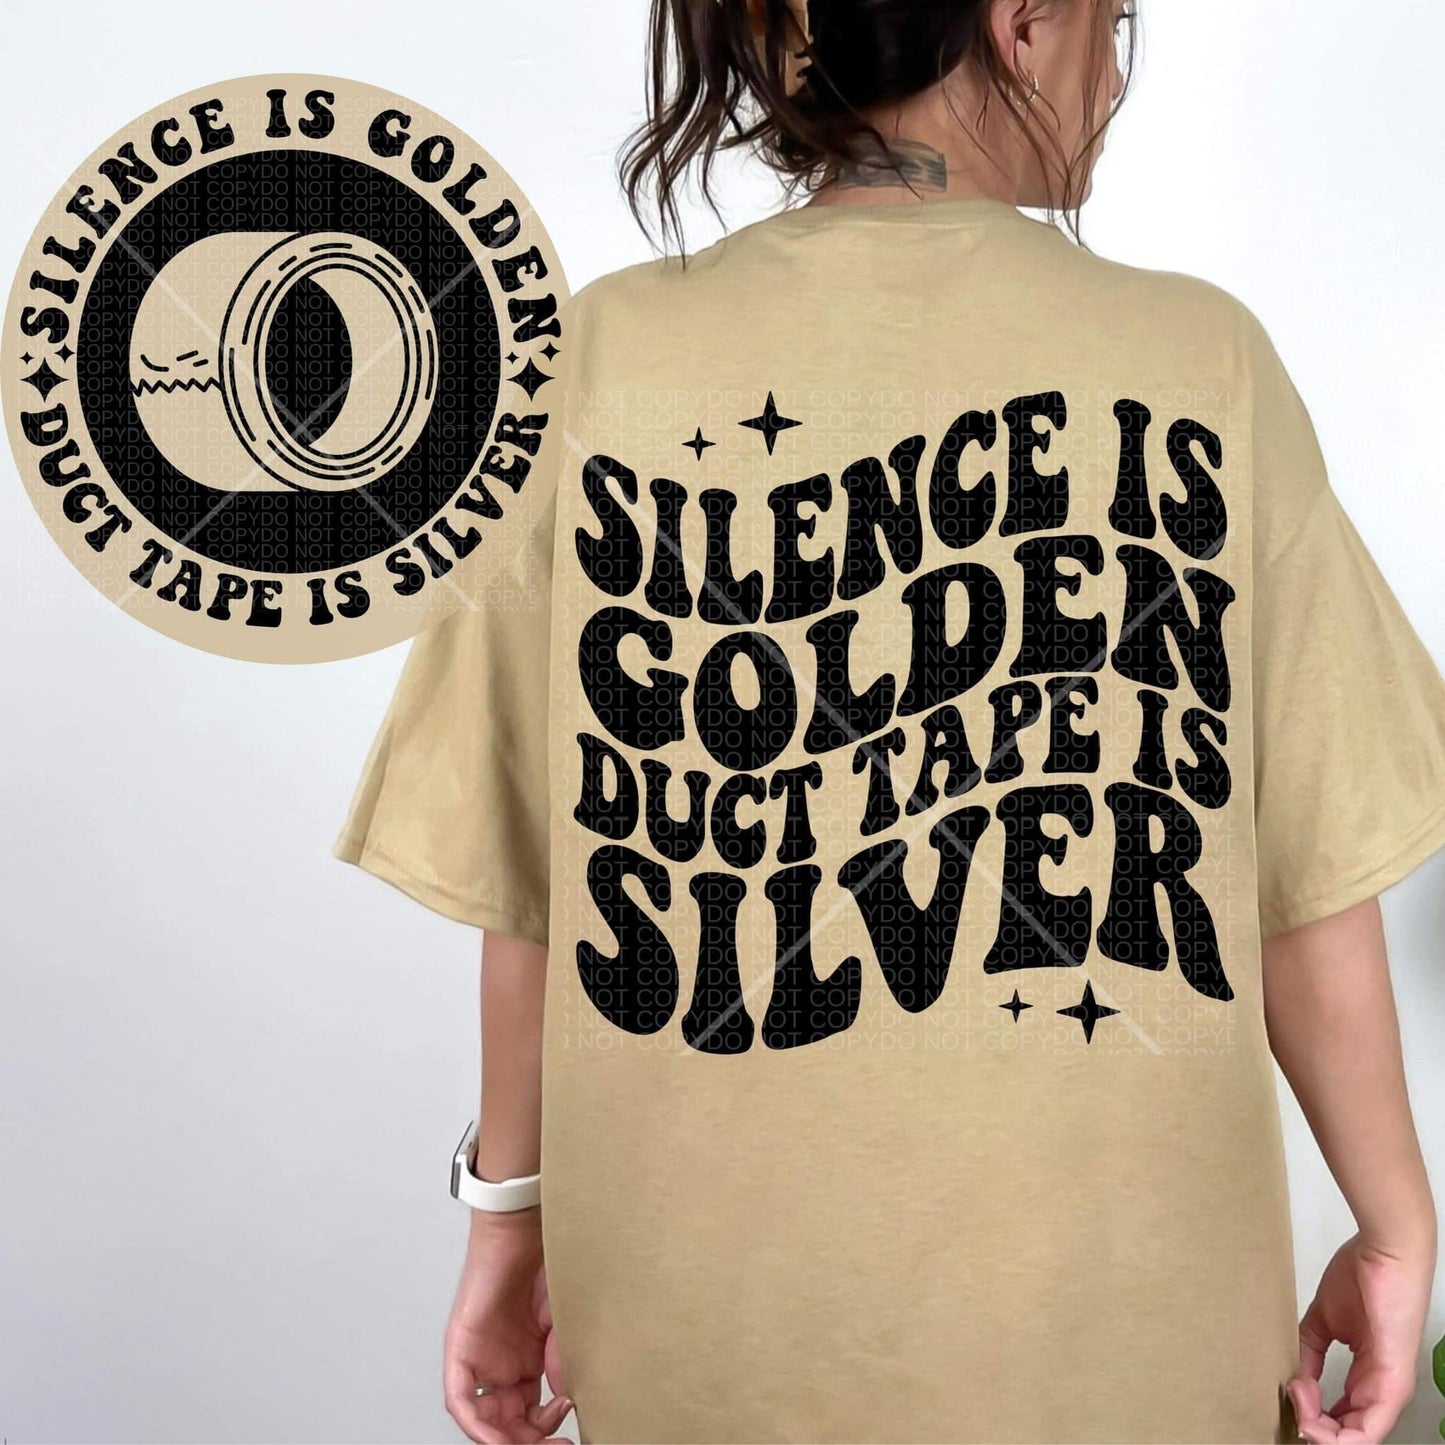 Silence is golden duct tape is silver *Ollie & Co. Exclusive*